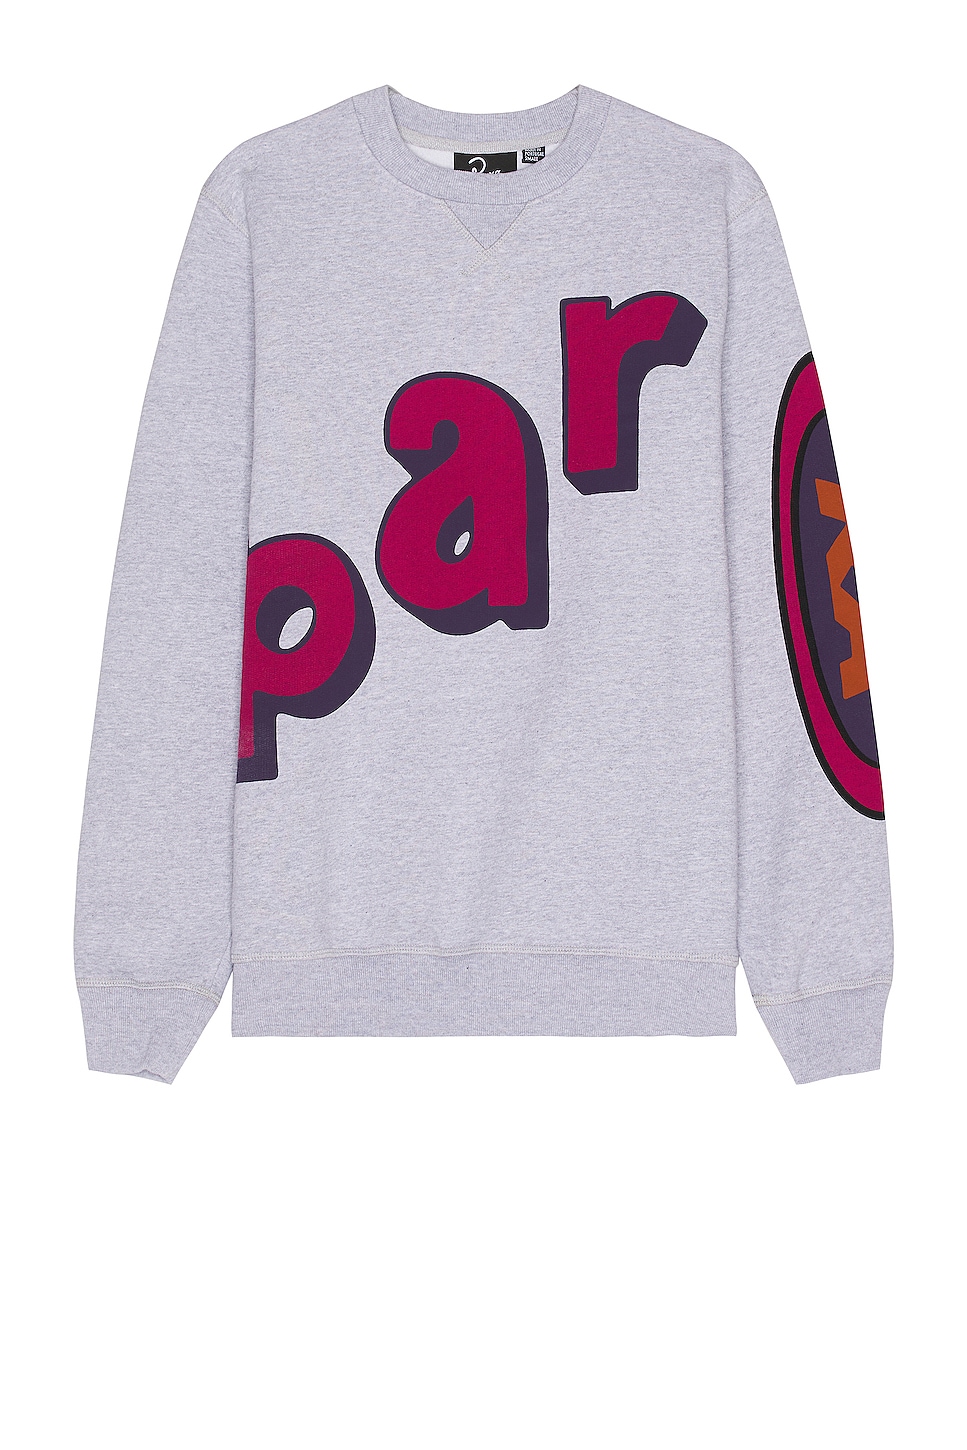 Image 1 of By Parra Loudness Crewneck in Heather Grey